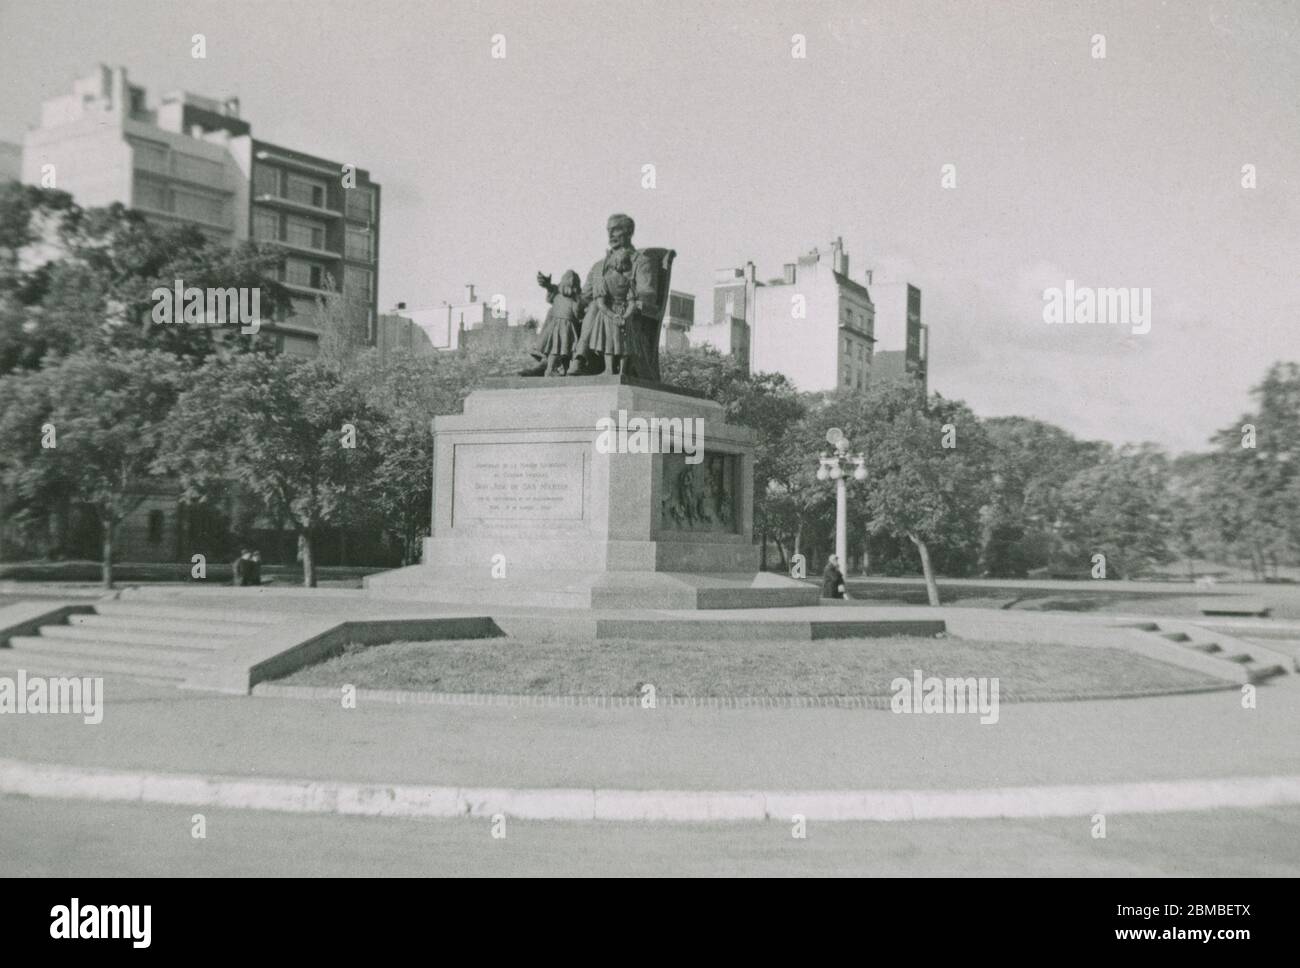 Vintage photograph, statue of José de San Martín with his grandchildren in Buenos Aires, Argentina on July 6–8, 1955. Taken by a passenger debarked from a cruise ship. SOURCE: ORIGINAL PHOTOGRAPH Stock Photo